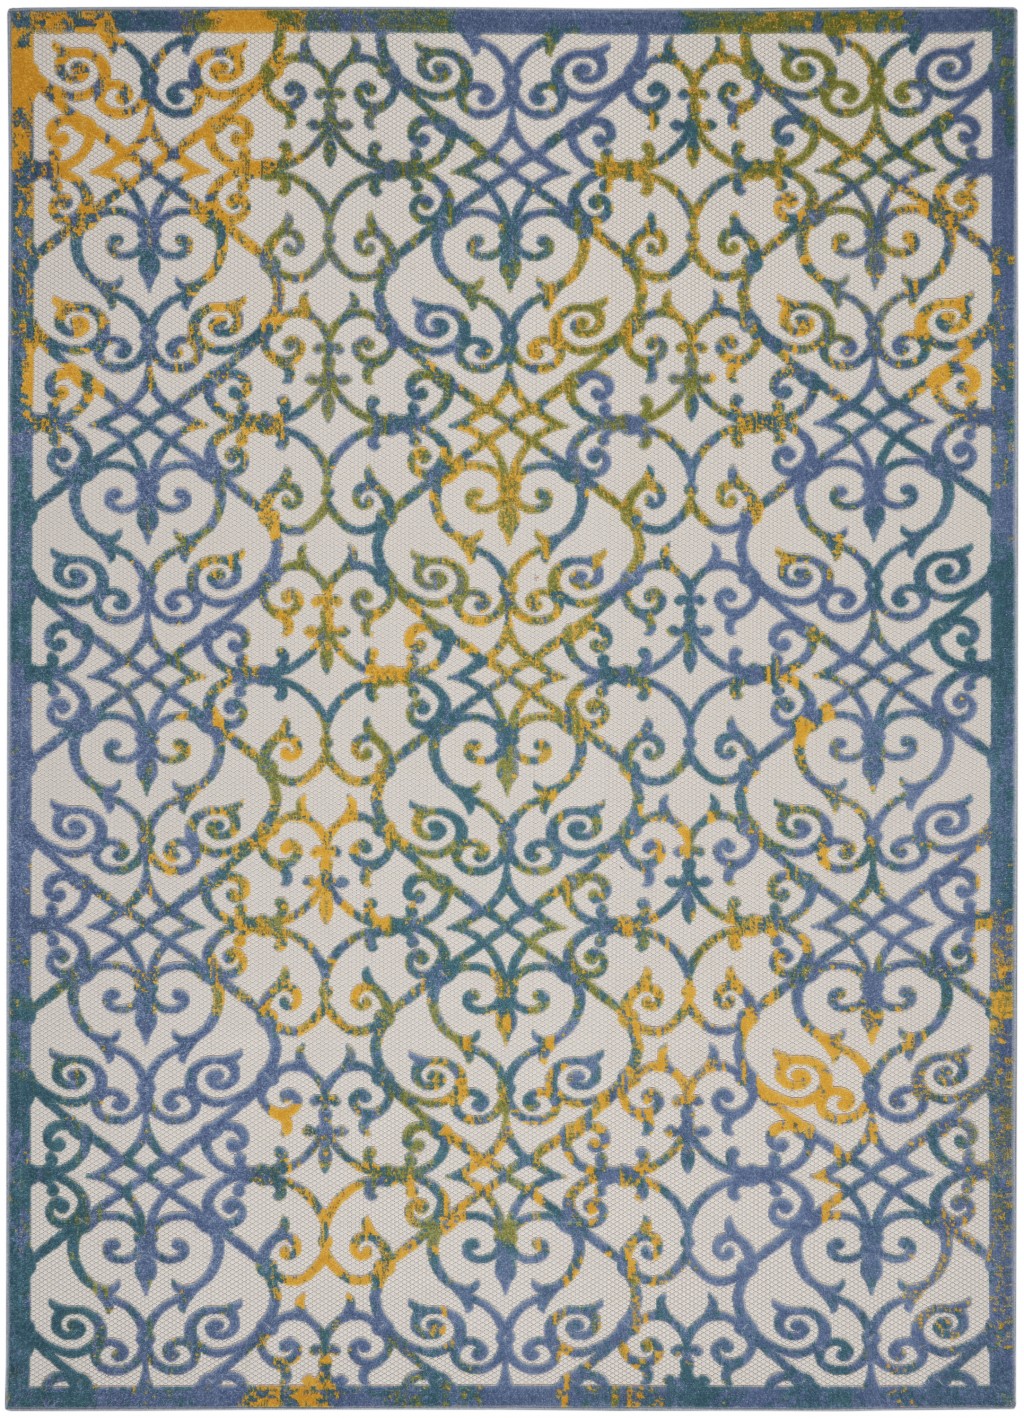 7' X 10' Ivory And Blue Floral Indoor Outdoor Area Rug-385022-1